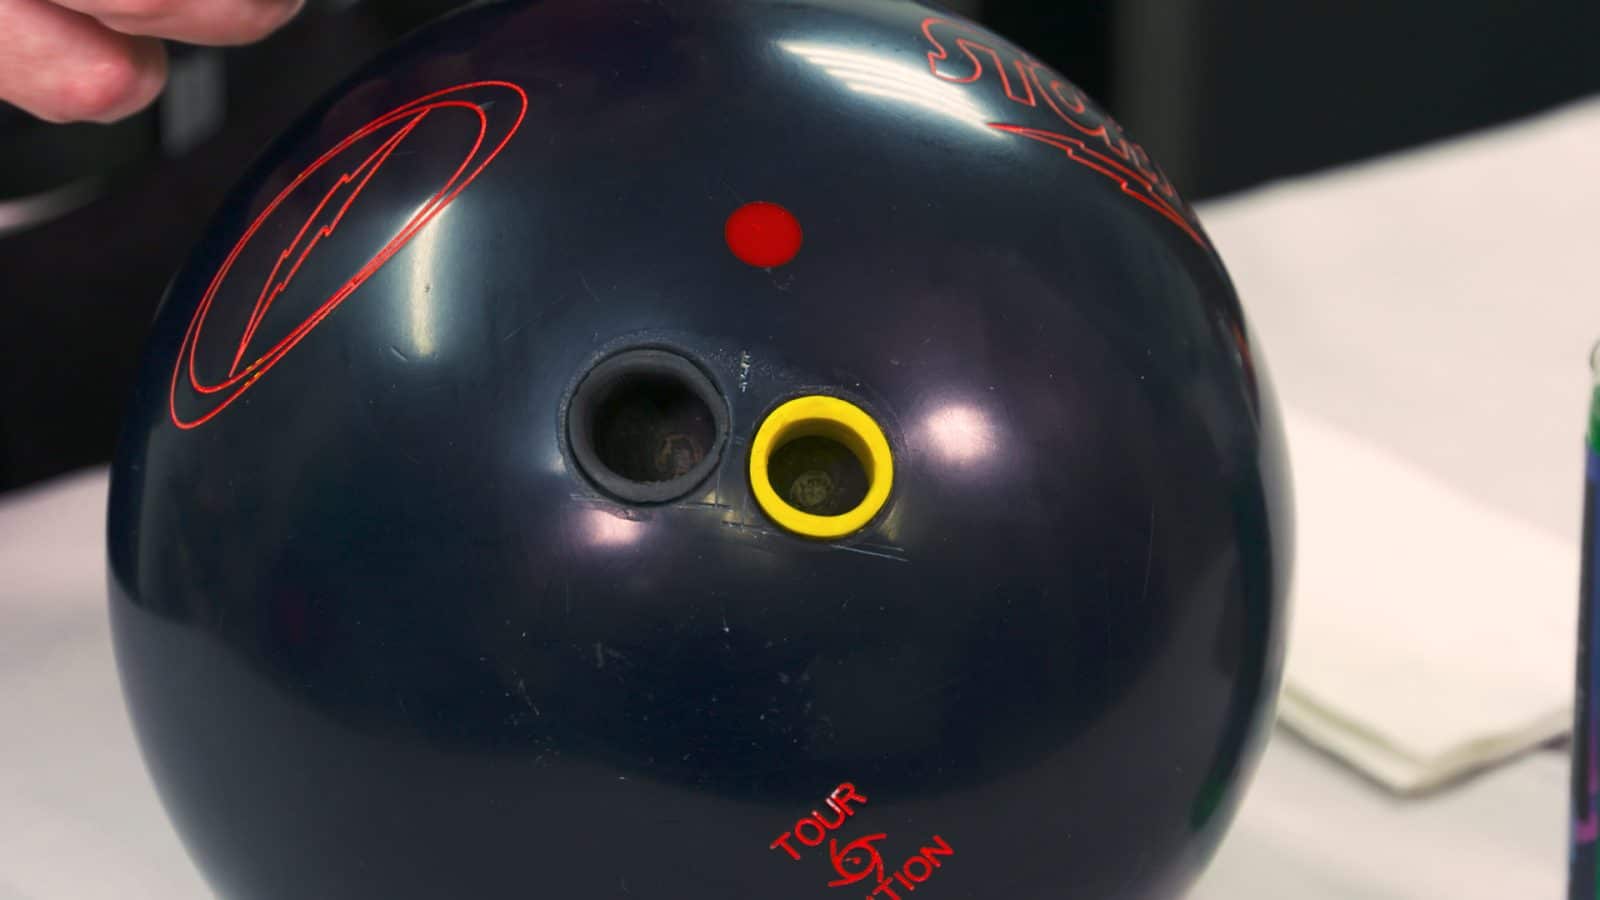 How Do You Clean And Take Care Of A Bowling Ball?